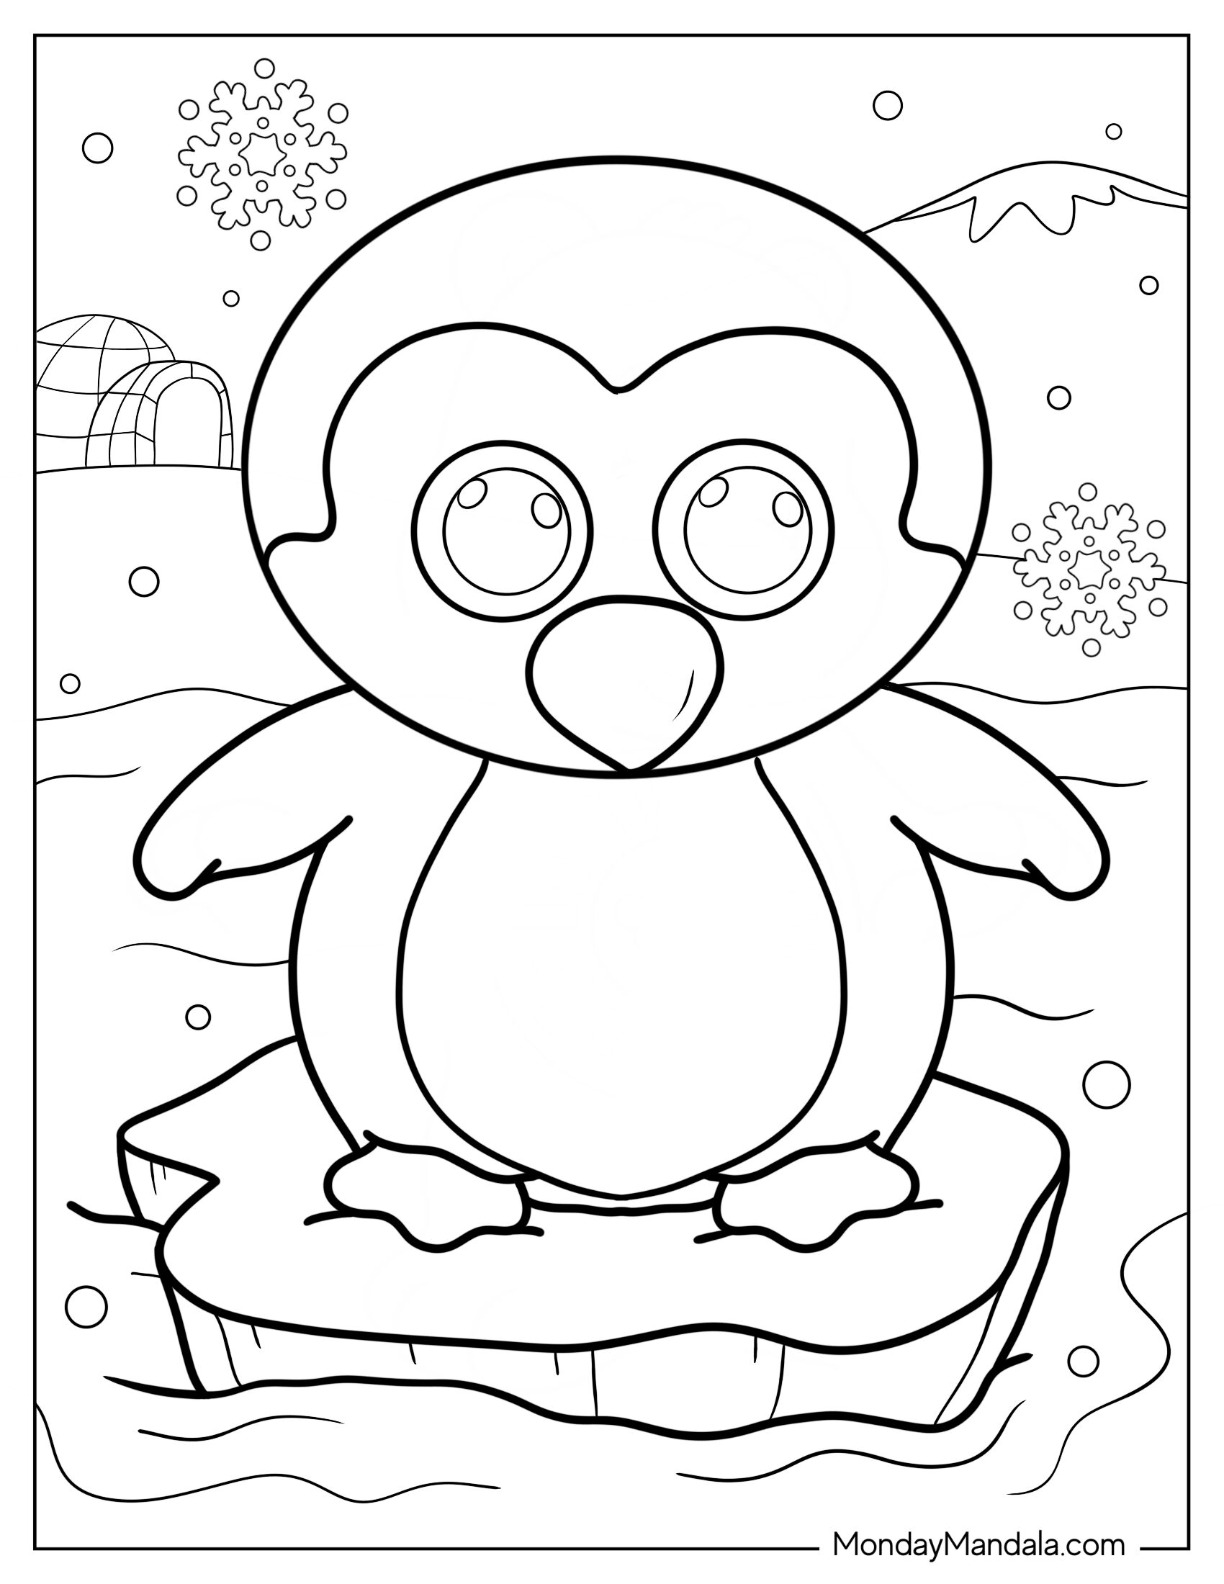 Beanie boo coloring pages free pdf printables